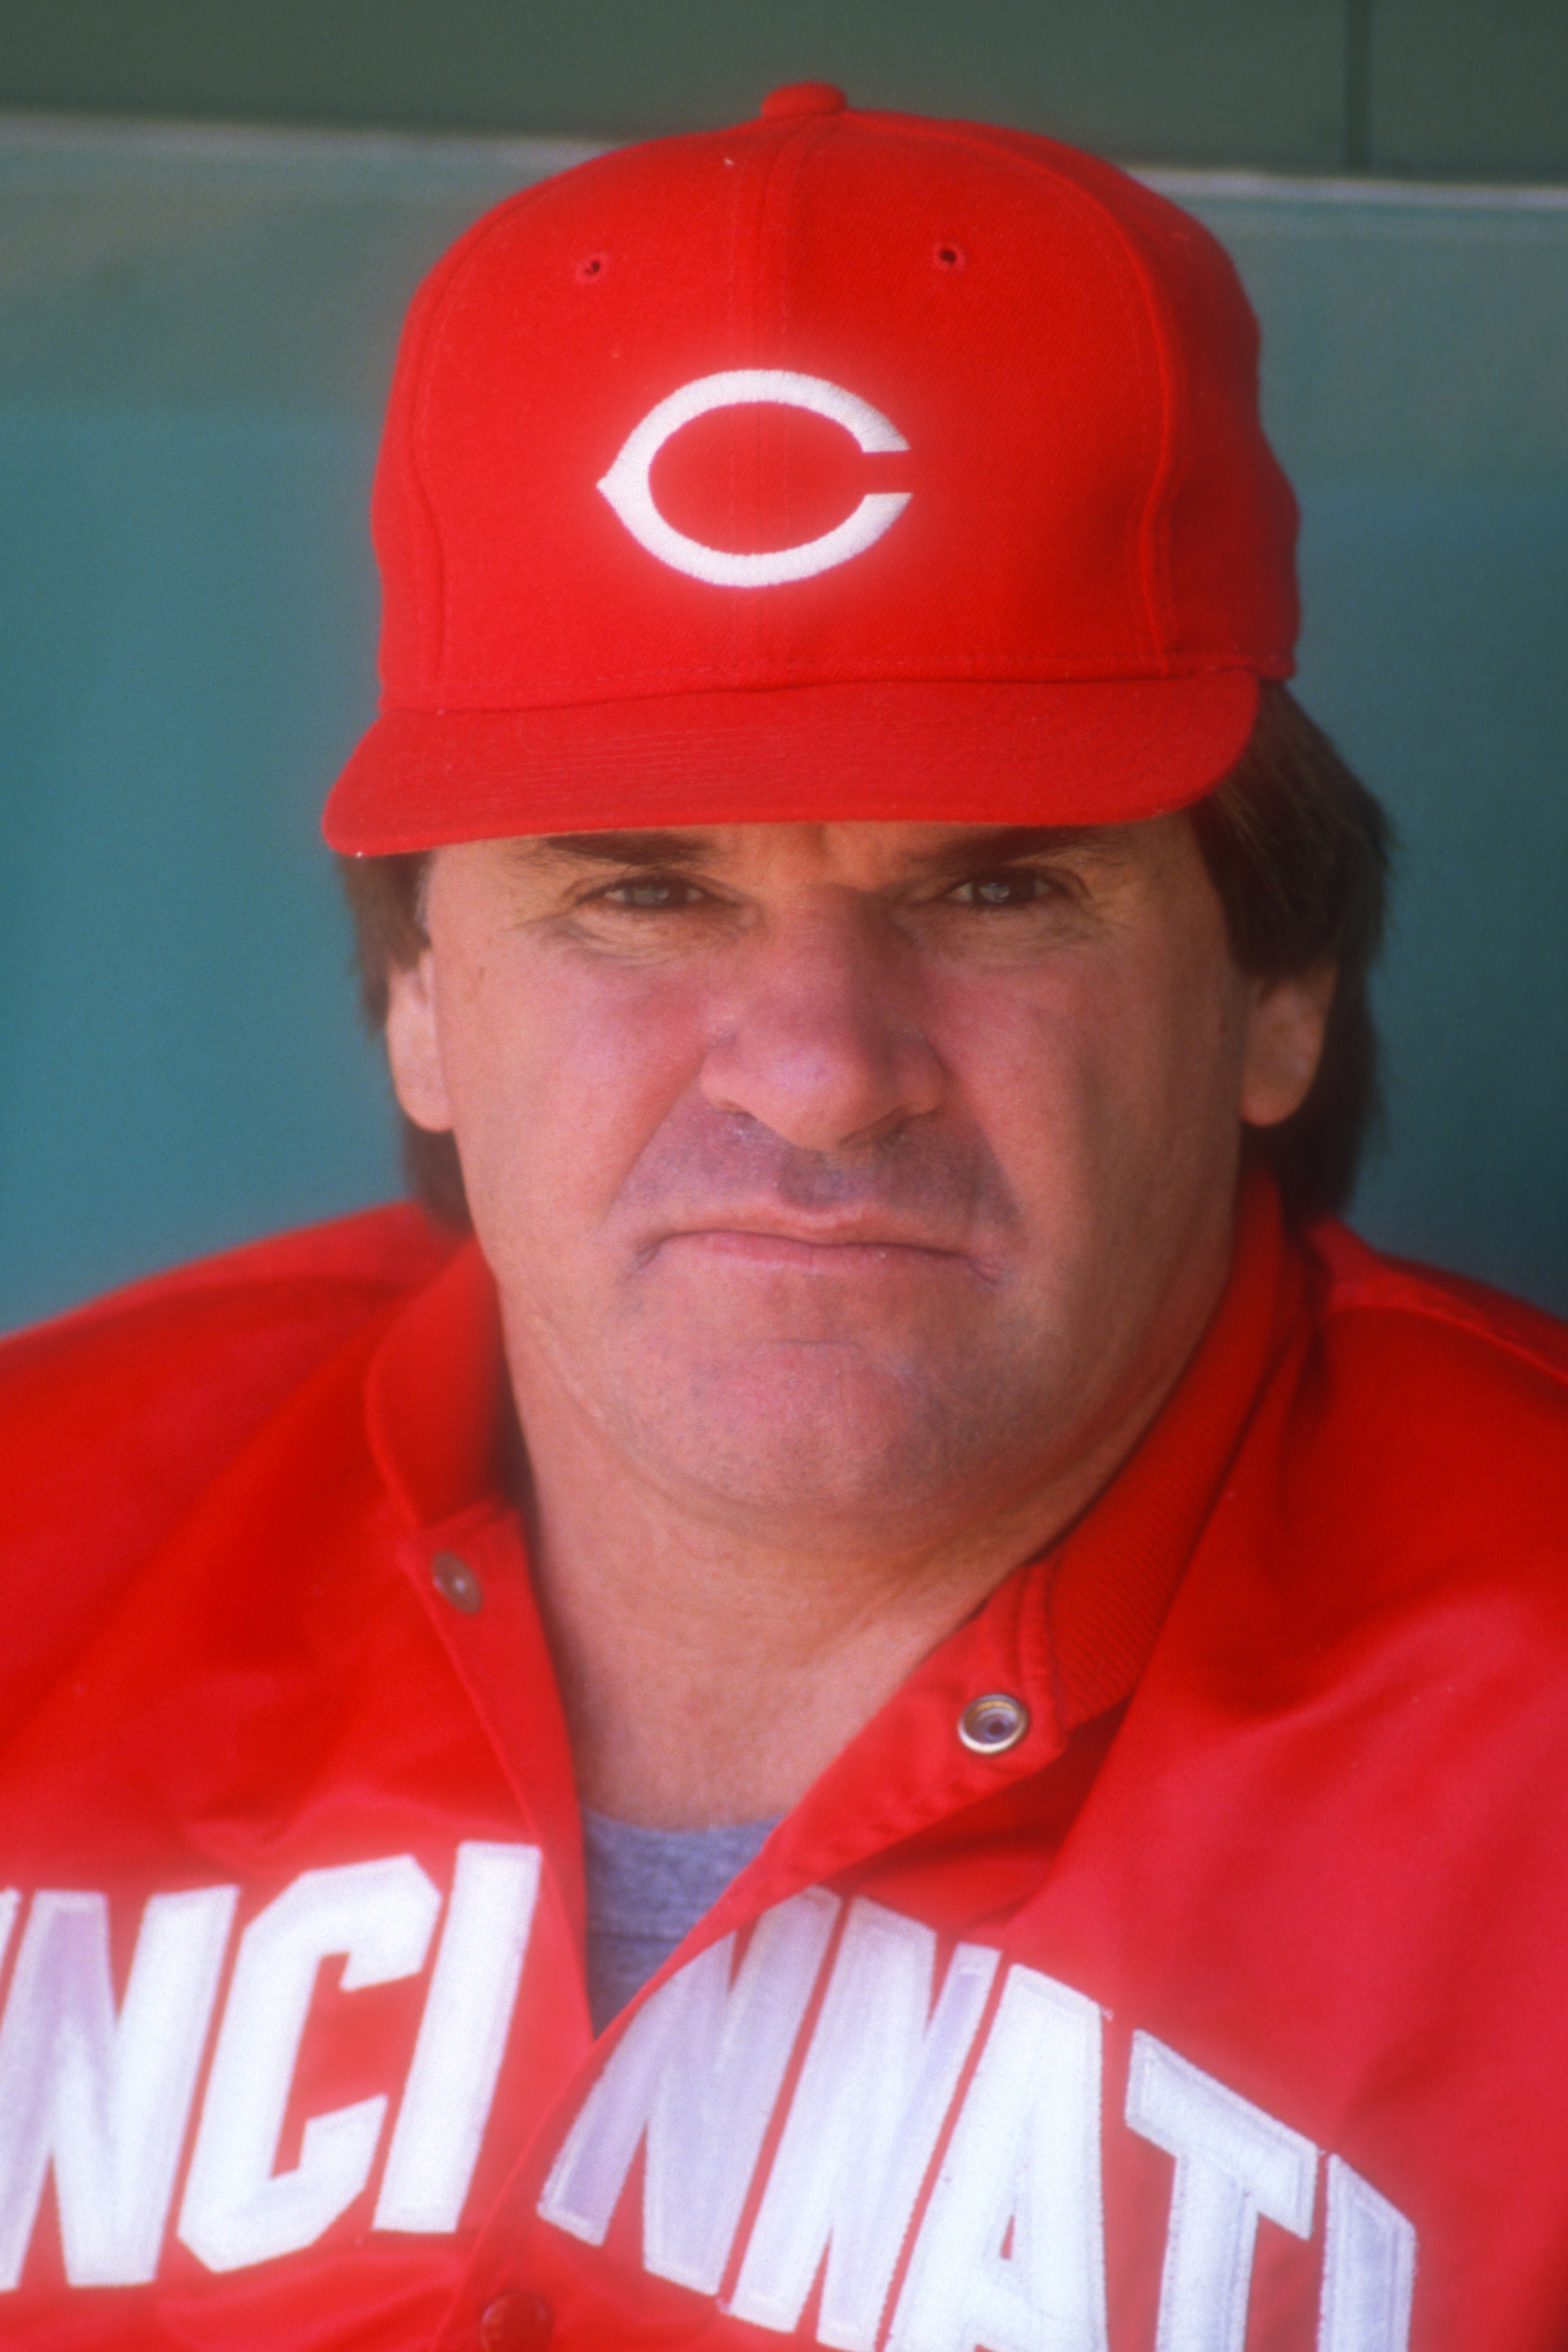 Manager Pete Rose #14 of the Cincinnati Reds looks on before a baseball game against the Philadelphia Phillies on May 11, 1988